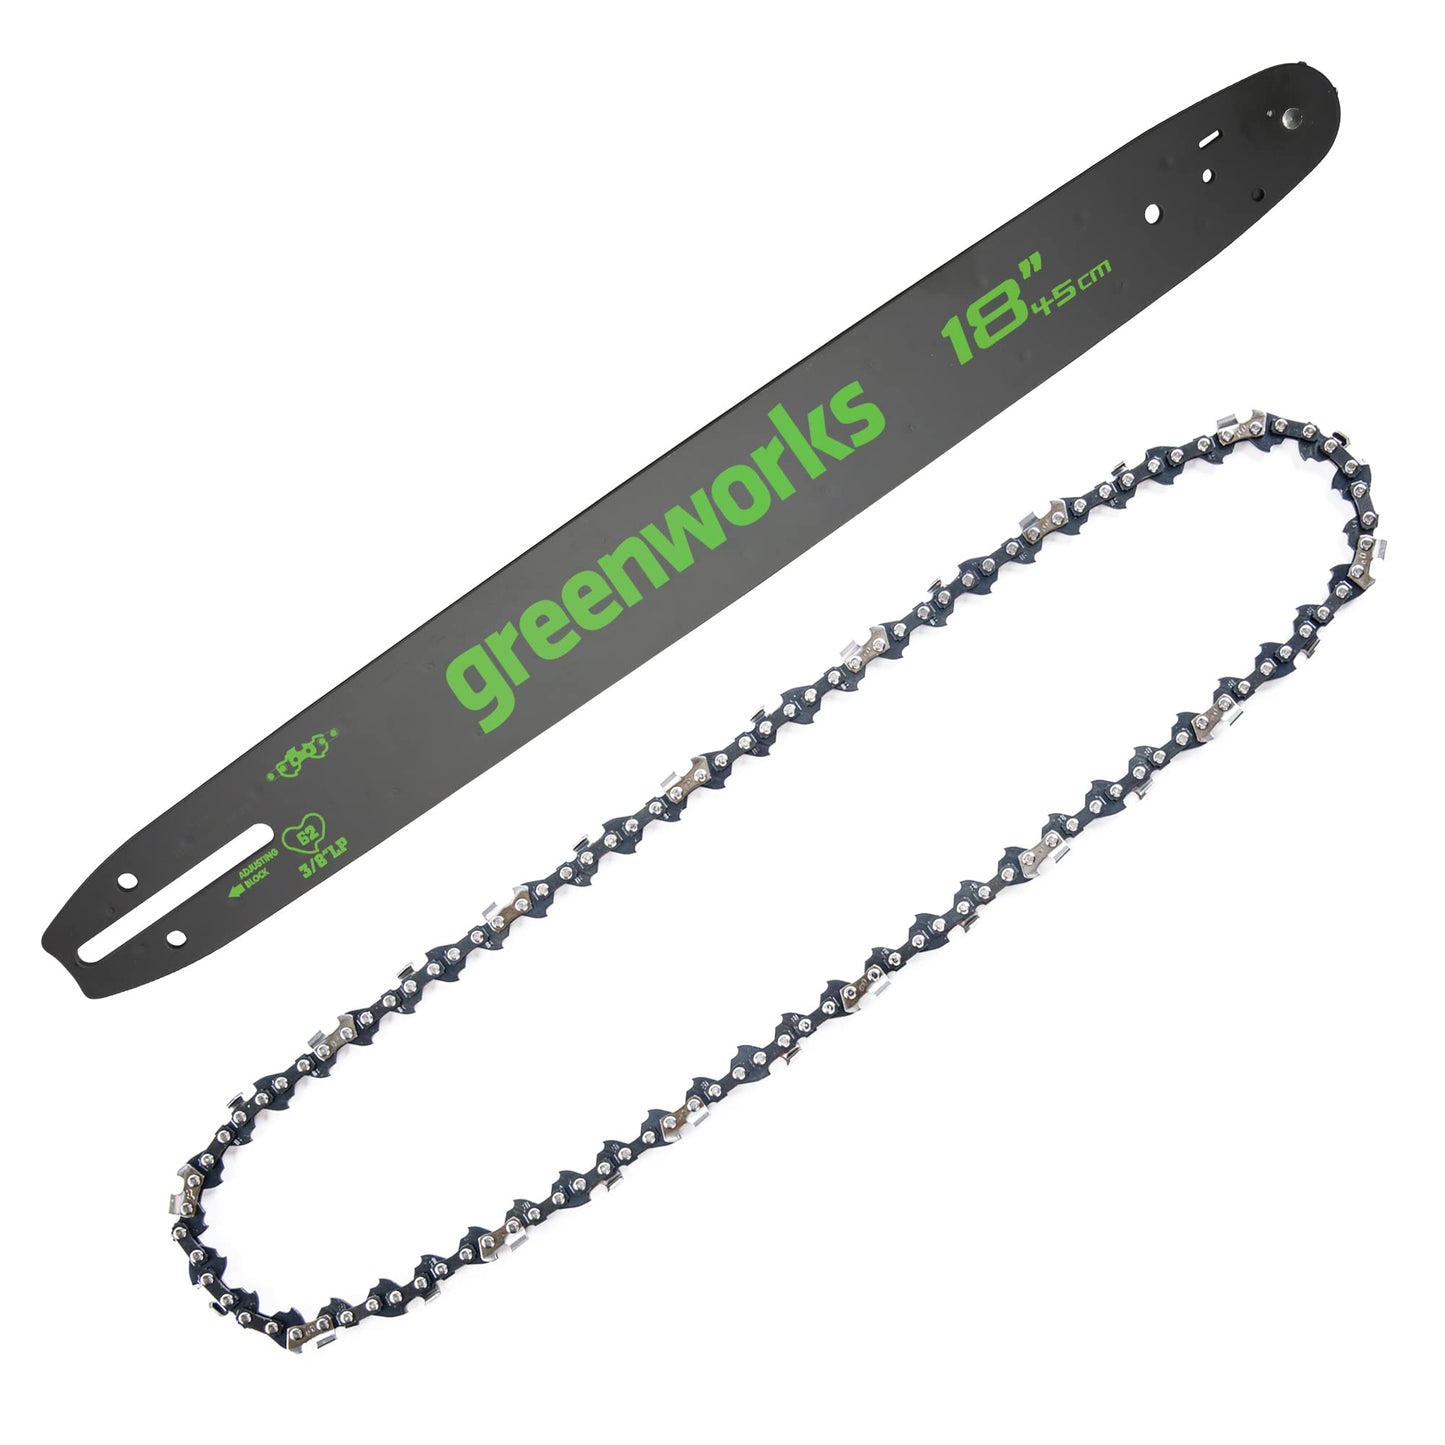 Greenworks - 18-inch Replacement Chainsaw Bar and Chain Combo - Black